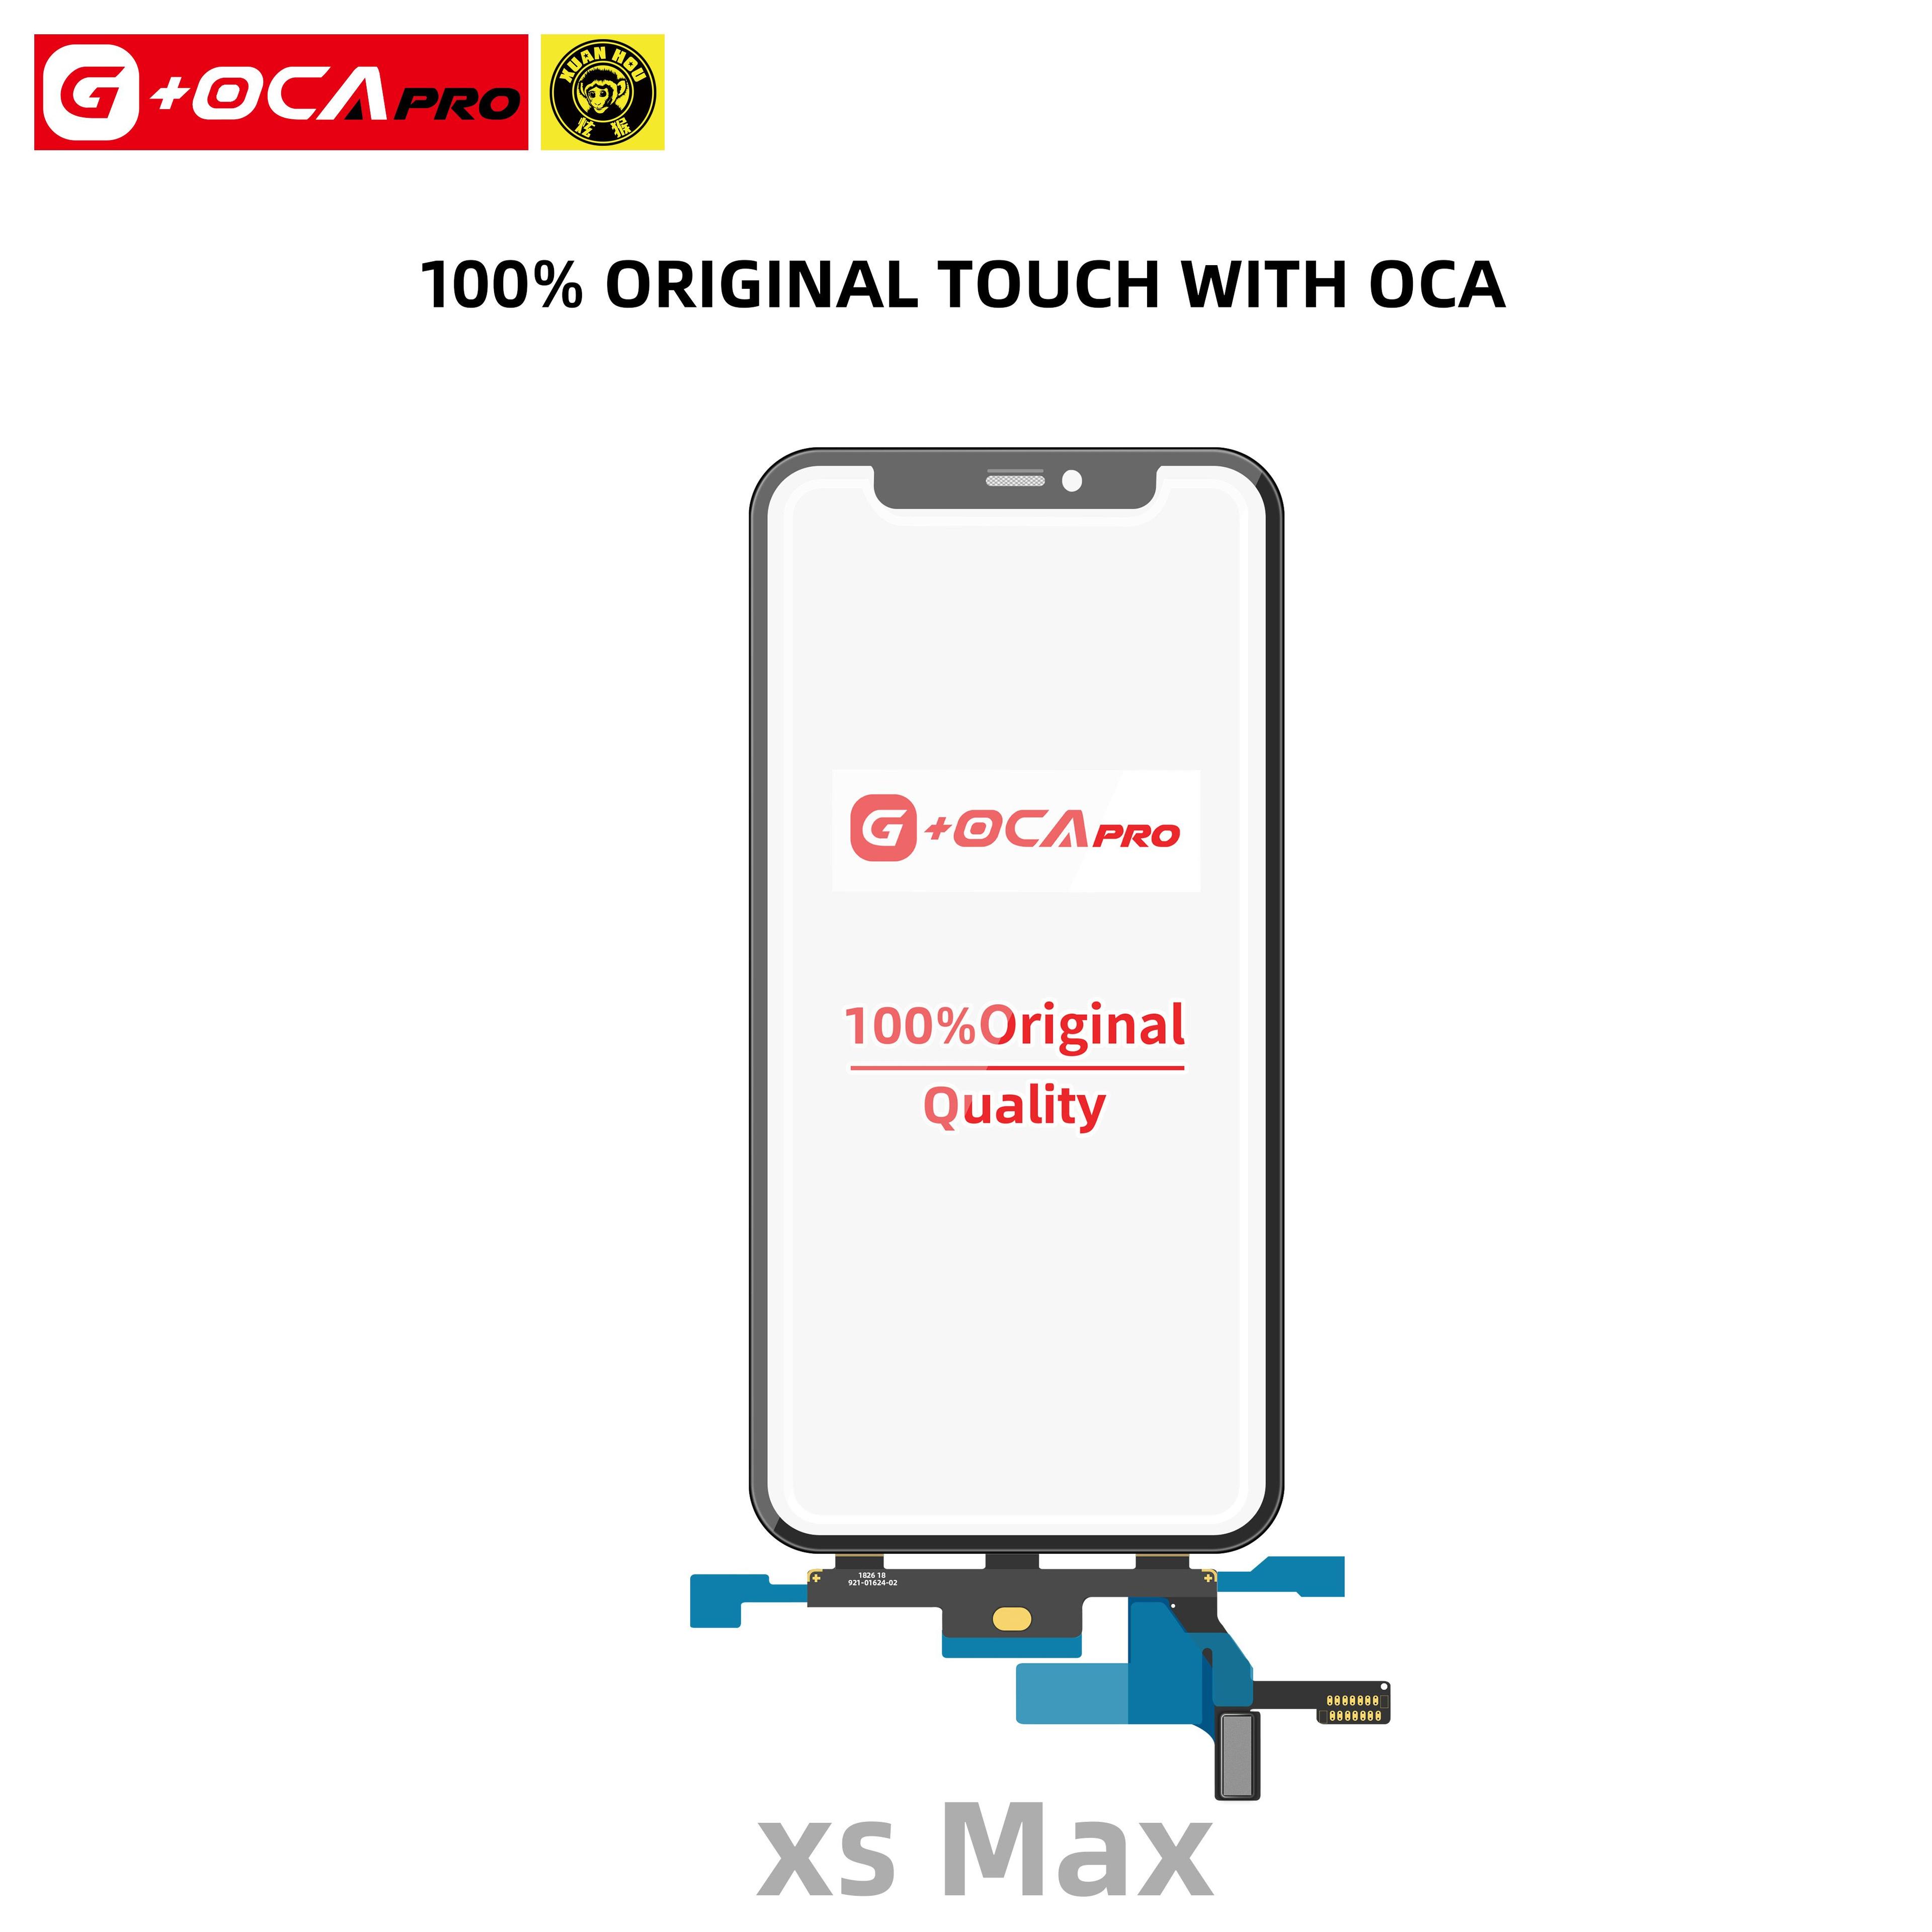 Touch Screen G + OCA Pro with original touch (with oleophobic cover) iPhone Xs Max